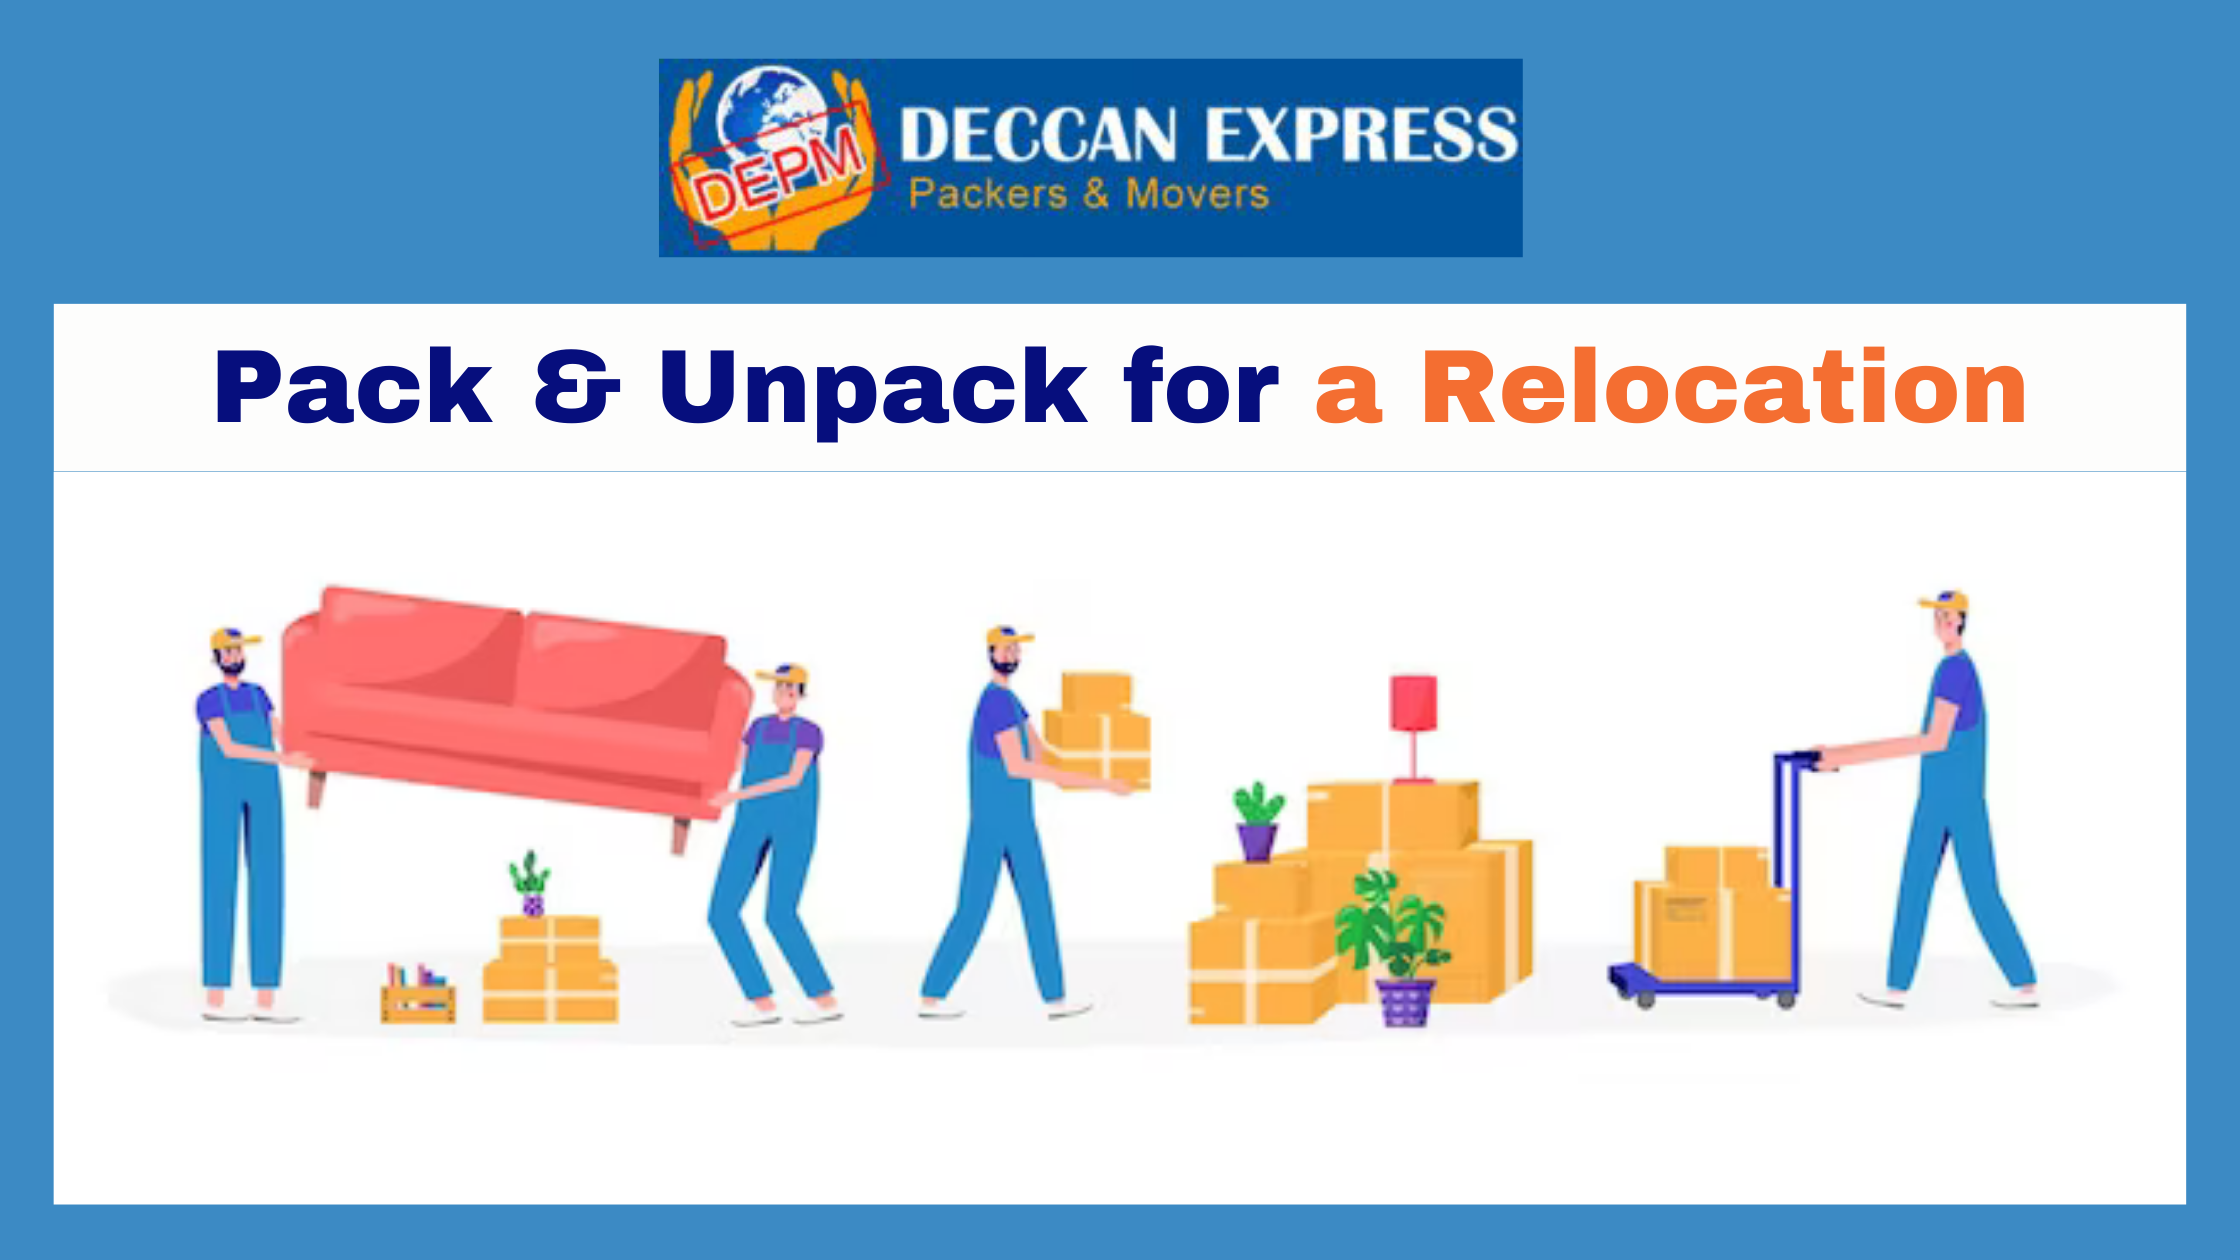 How to pack and unpack for a relocation for work?